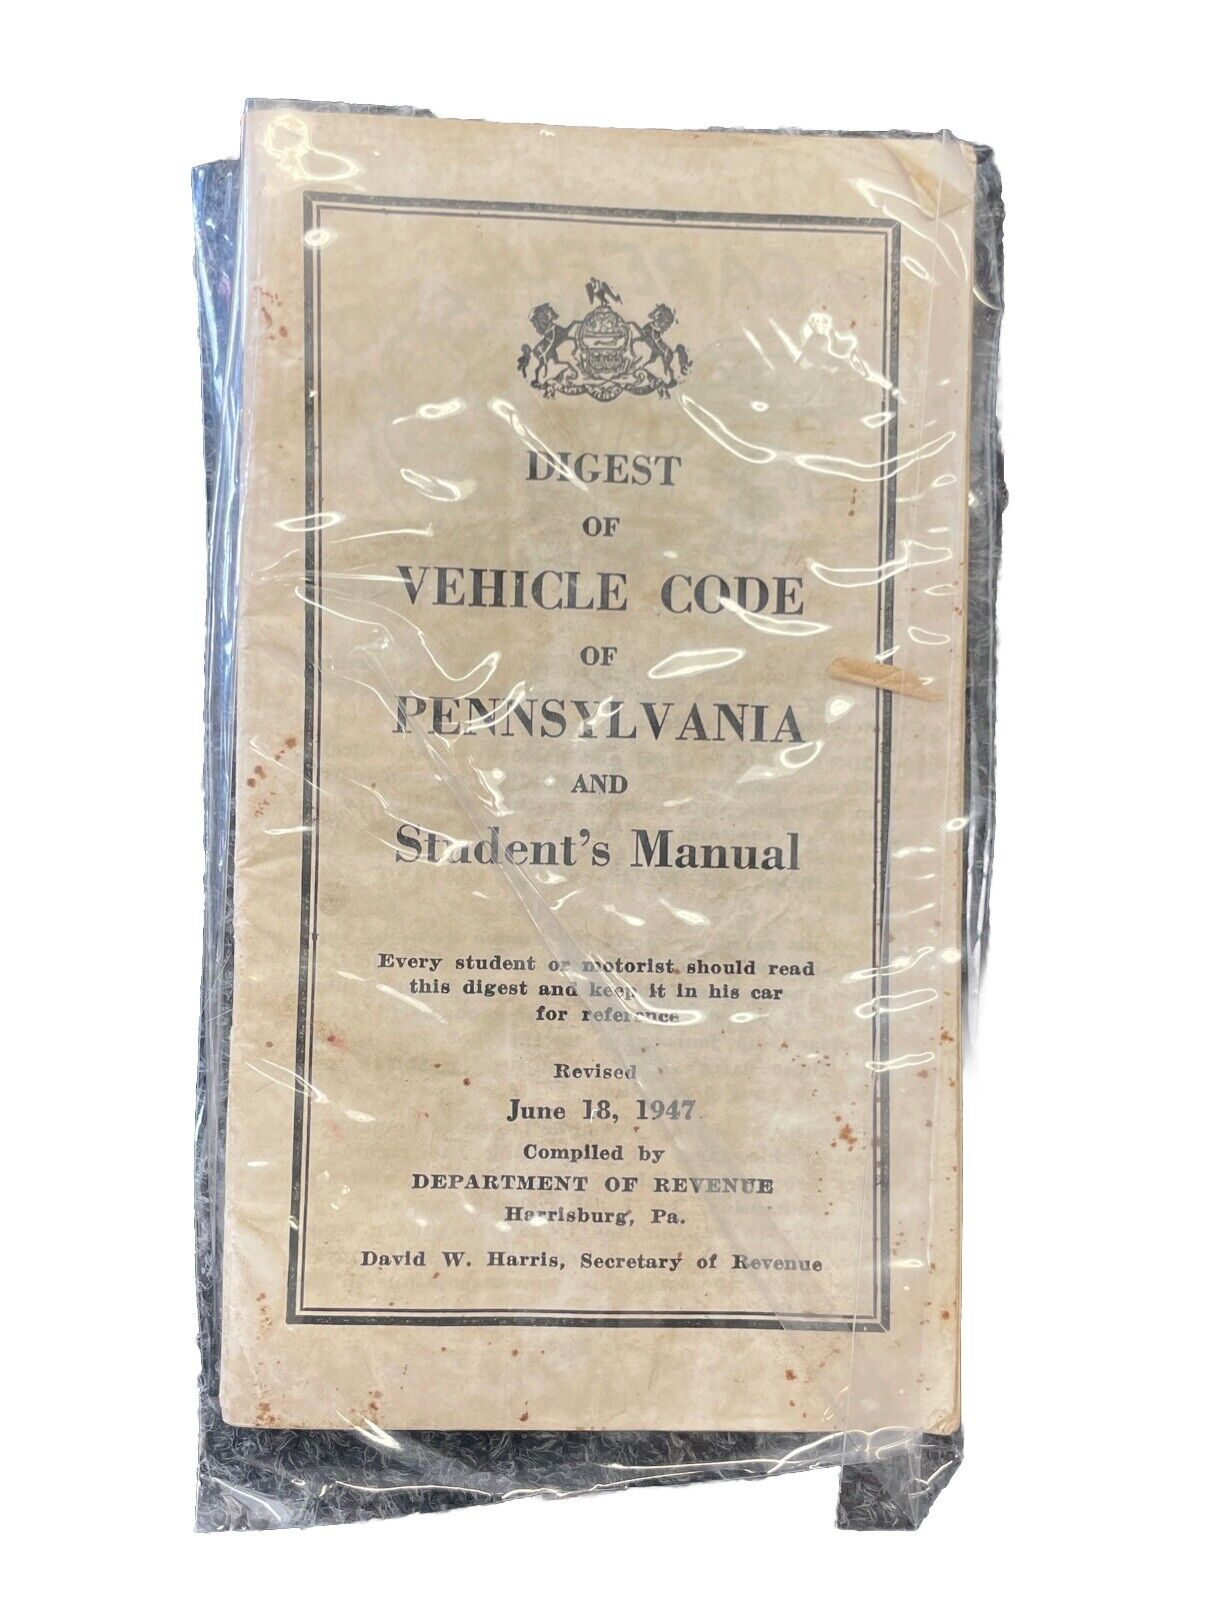 Digest of Vehicle Code of Pennsylvania And Student’s Manual